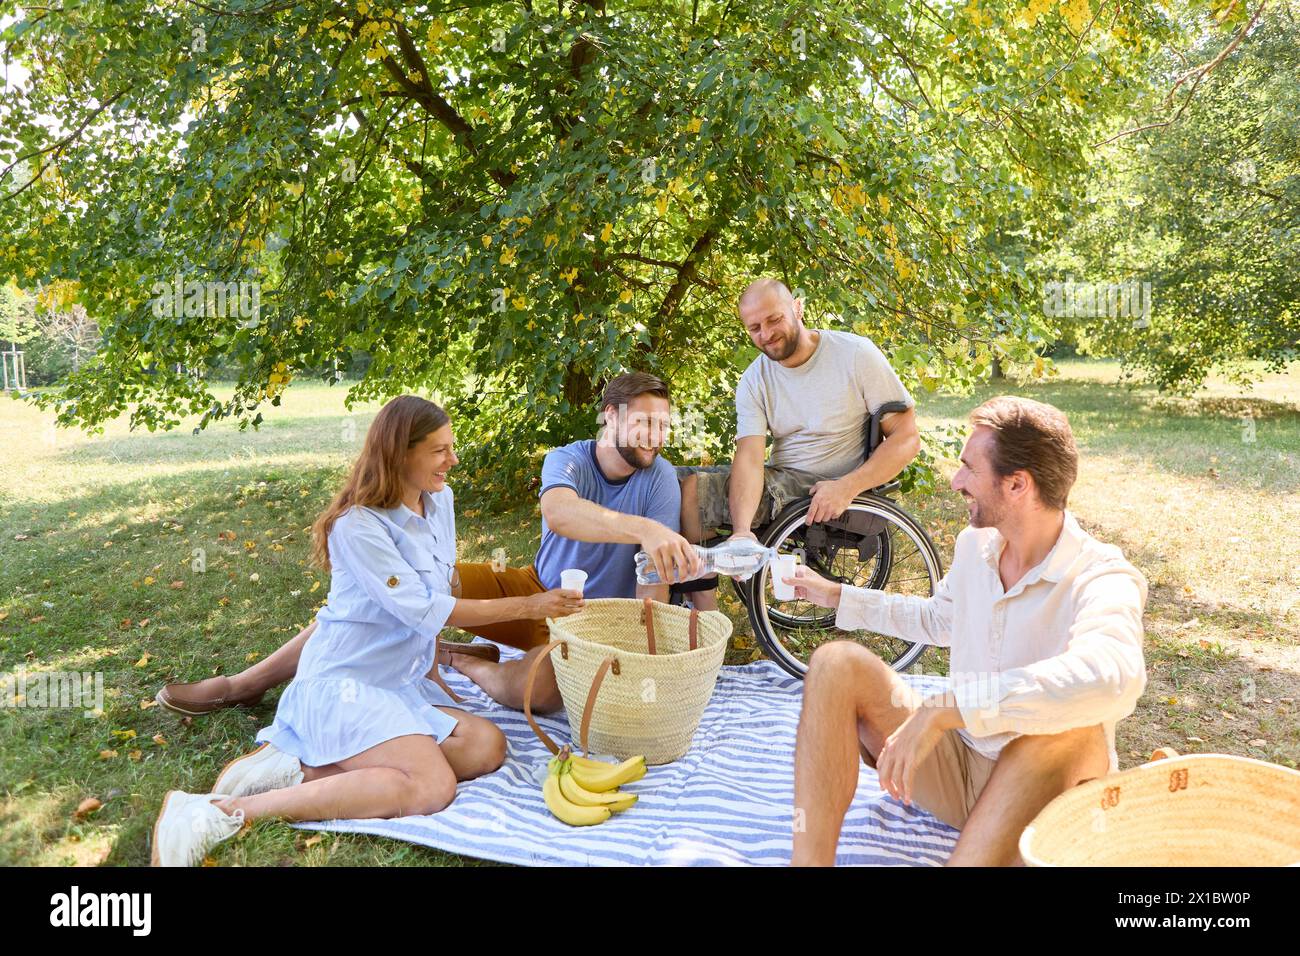 A group of friends enjoying a cheerful picnic in a park, featuring a person in a wheelchair, illustrating inclusivity and friendship. Stock Photo